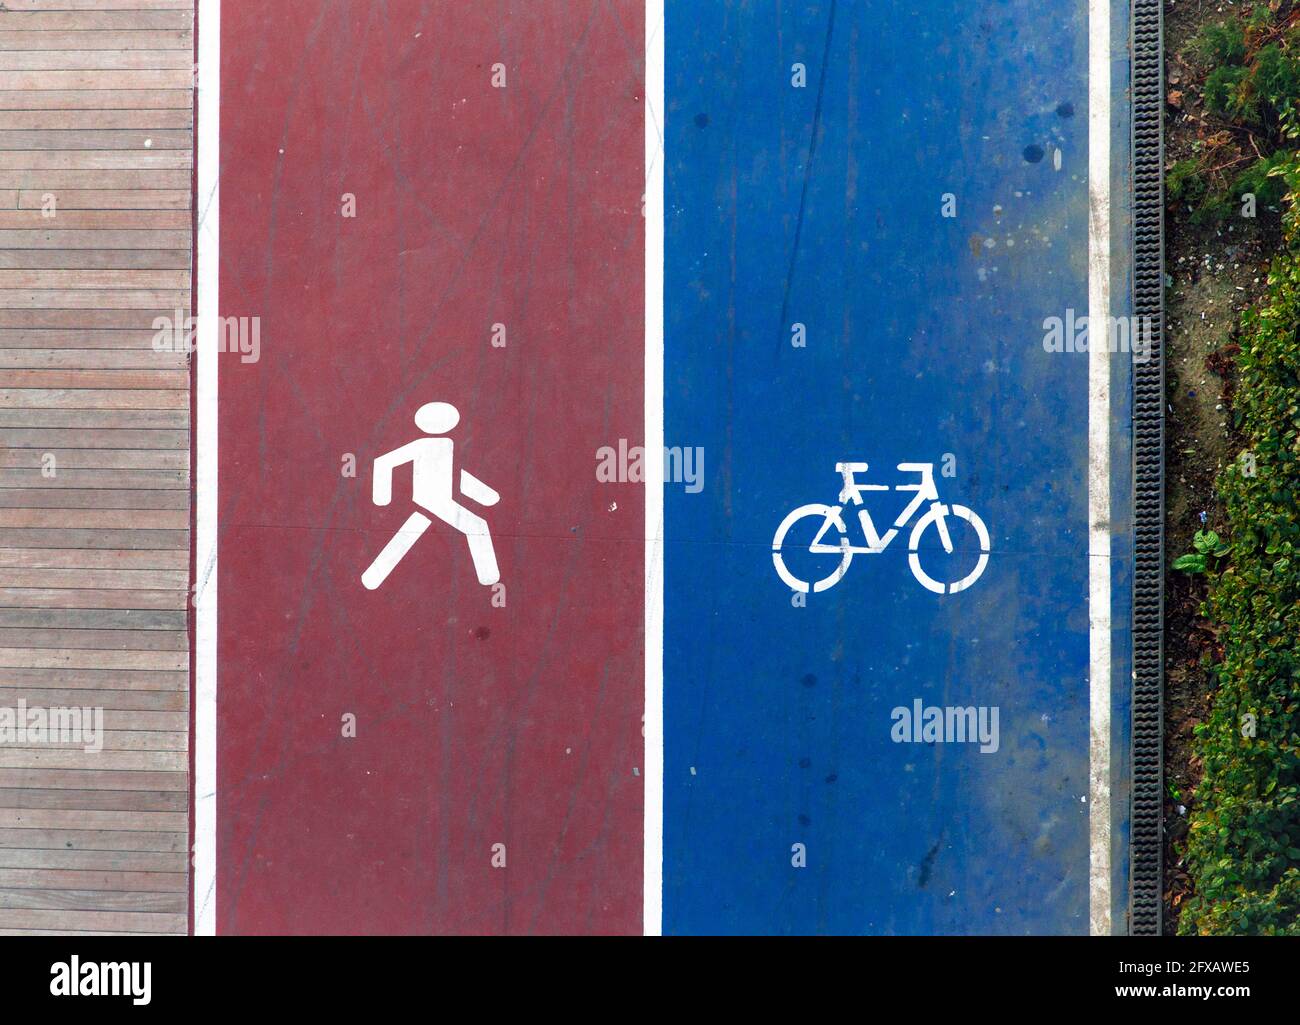 Running and cycling icons on ground. Transport mode choice in contemporary cities. Stock Photo